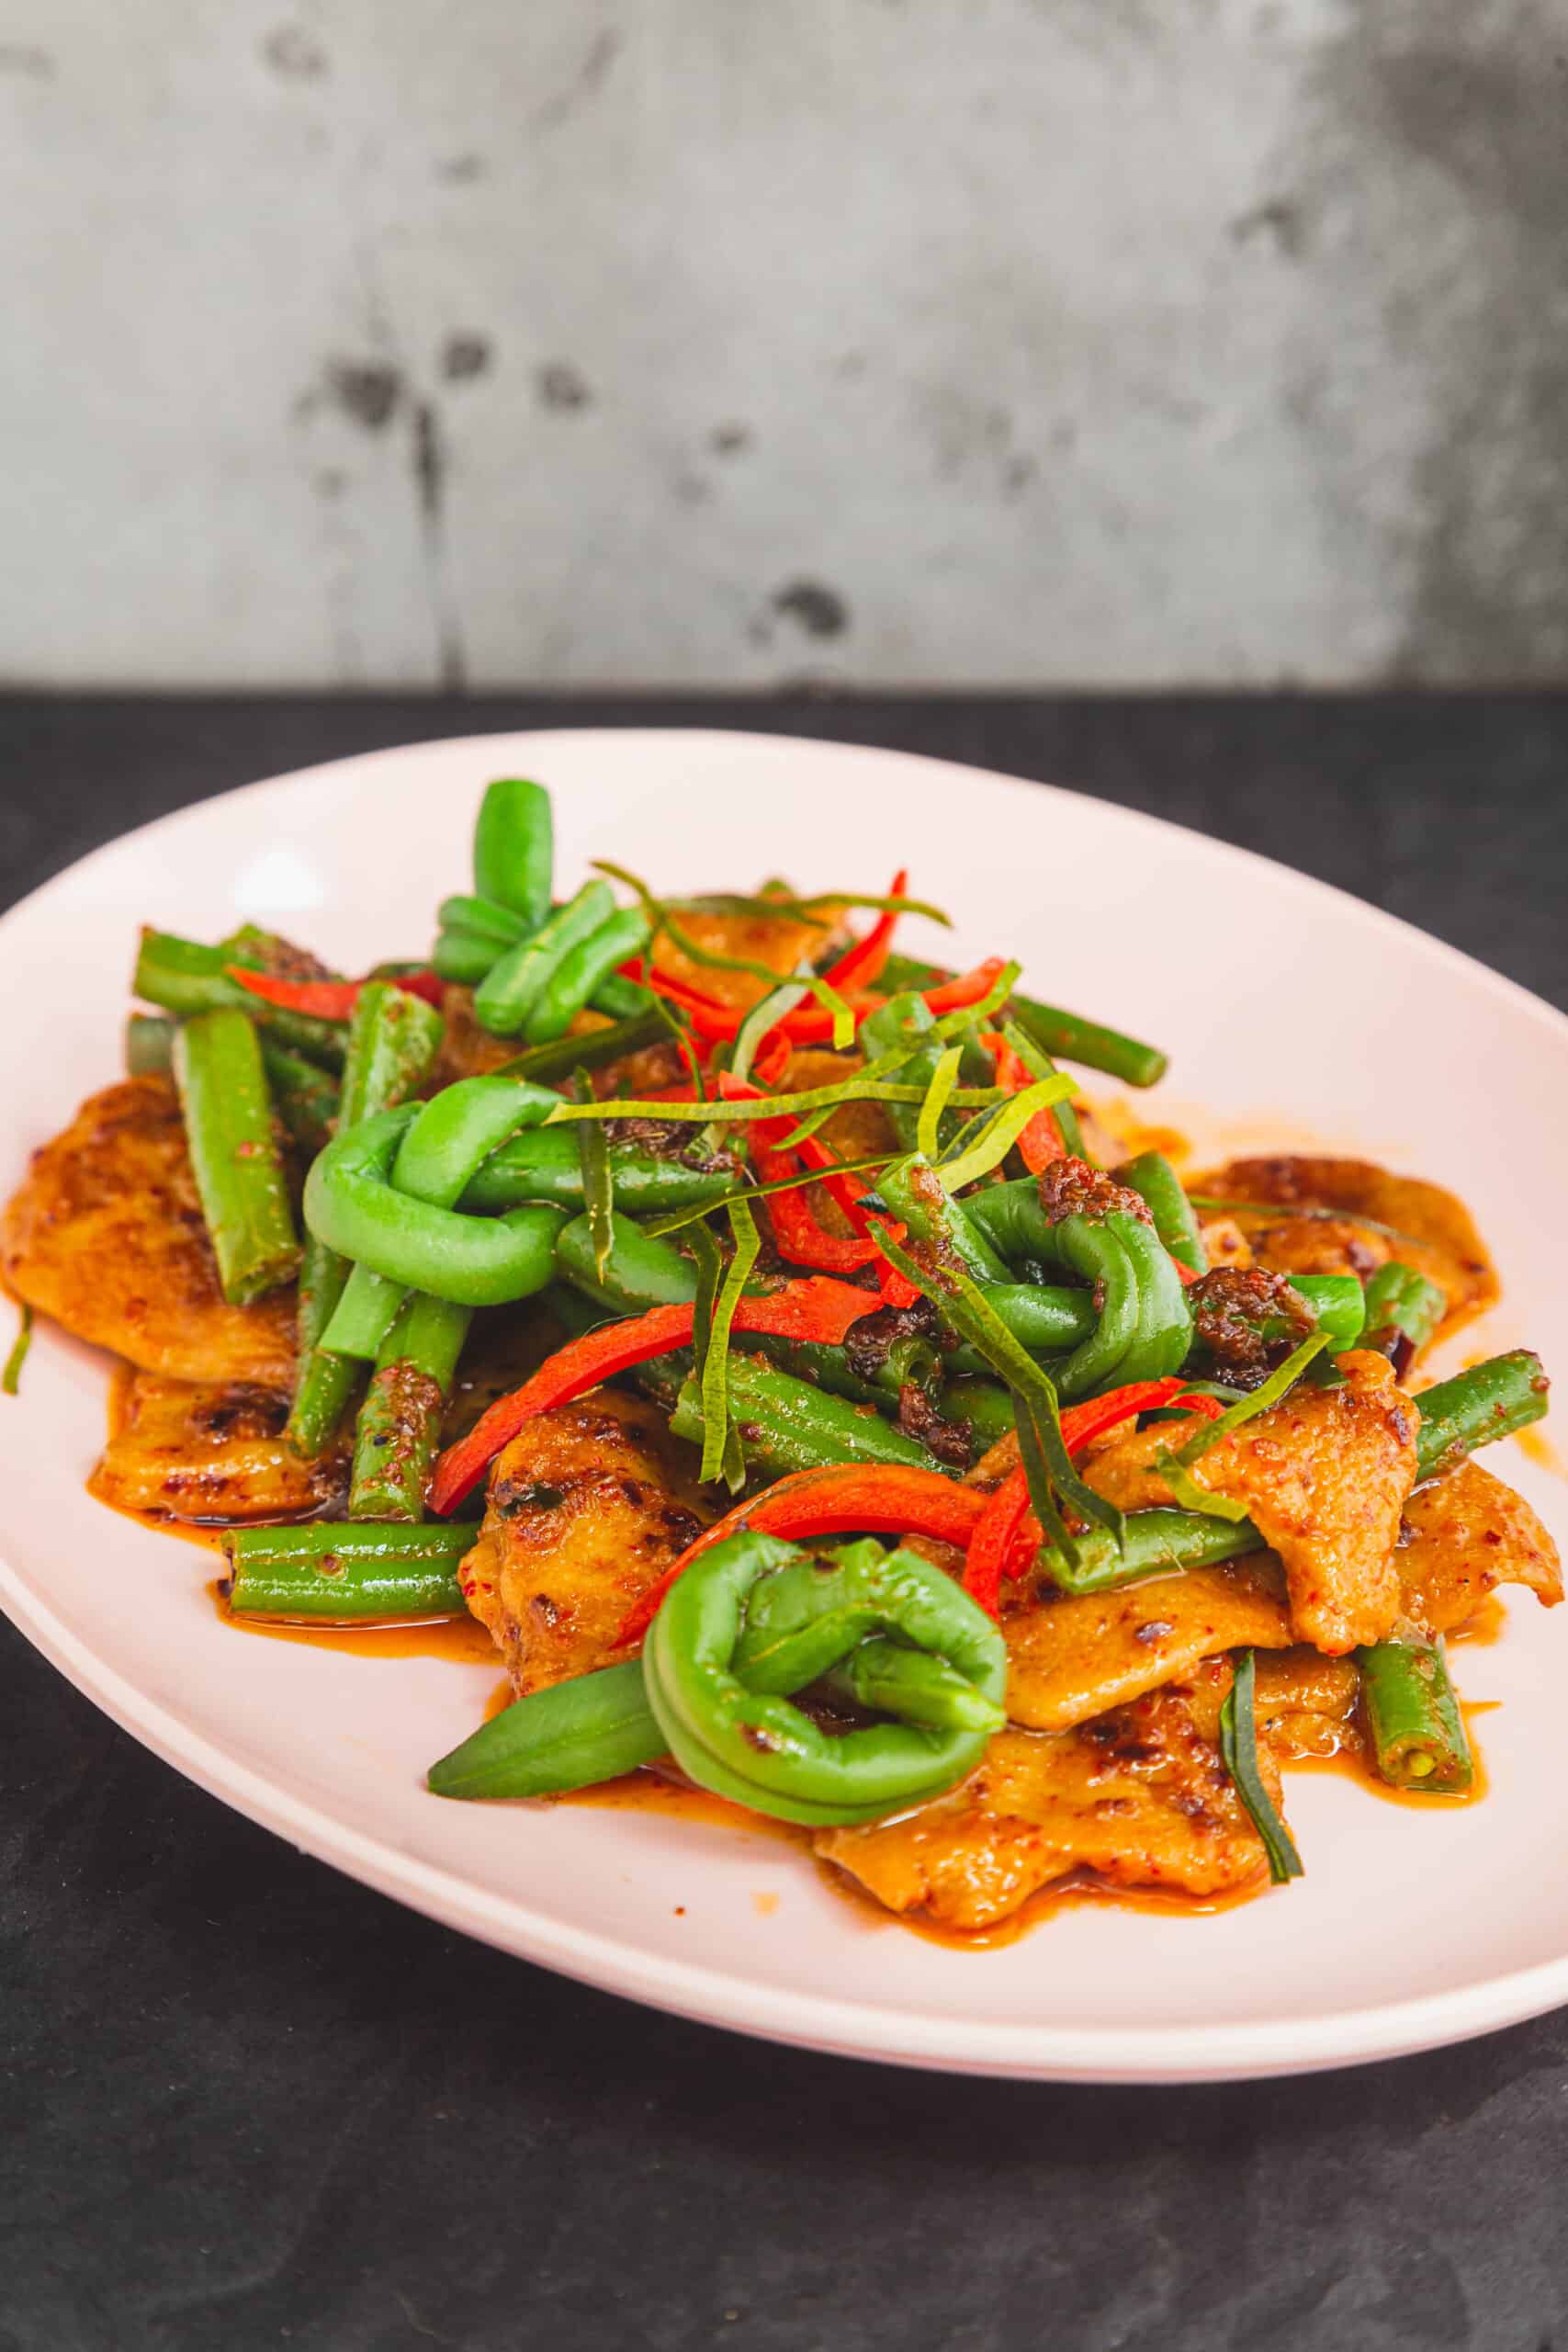 light pink oval melamine dish on a dark background. Plate contains stir fried seitan with green beans in red curry paste (vegan pad prik king)